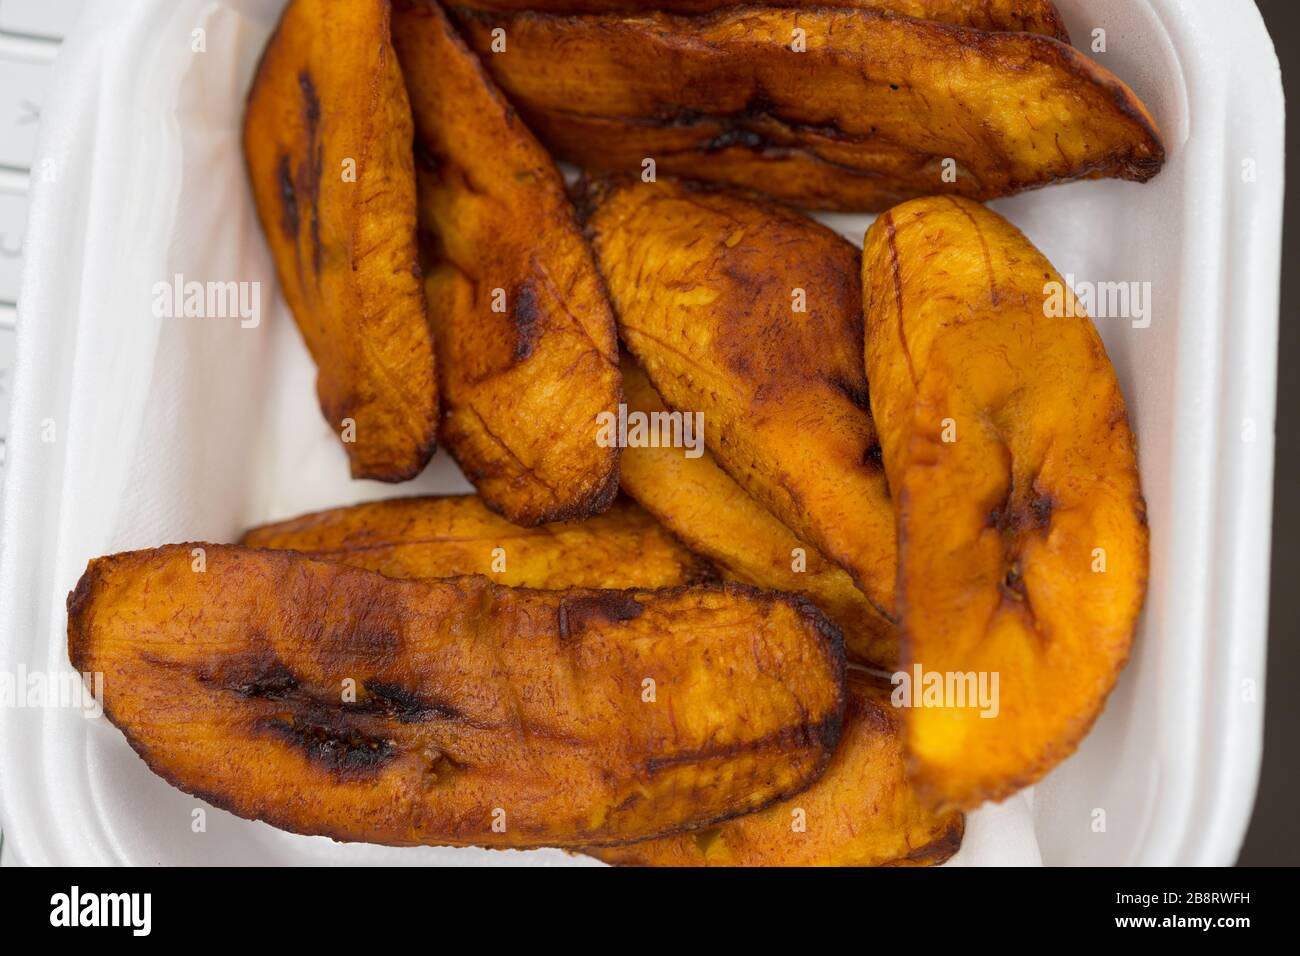 Fried ripe plantains, popular breakfast staple in Caribbean & Central American countries. Stock Photo